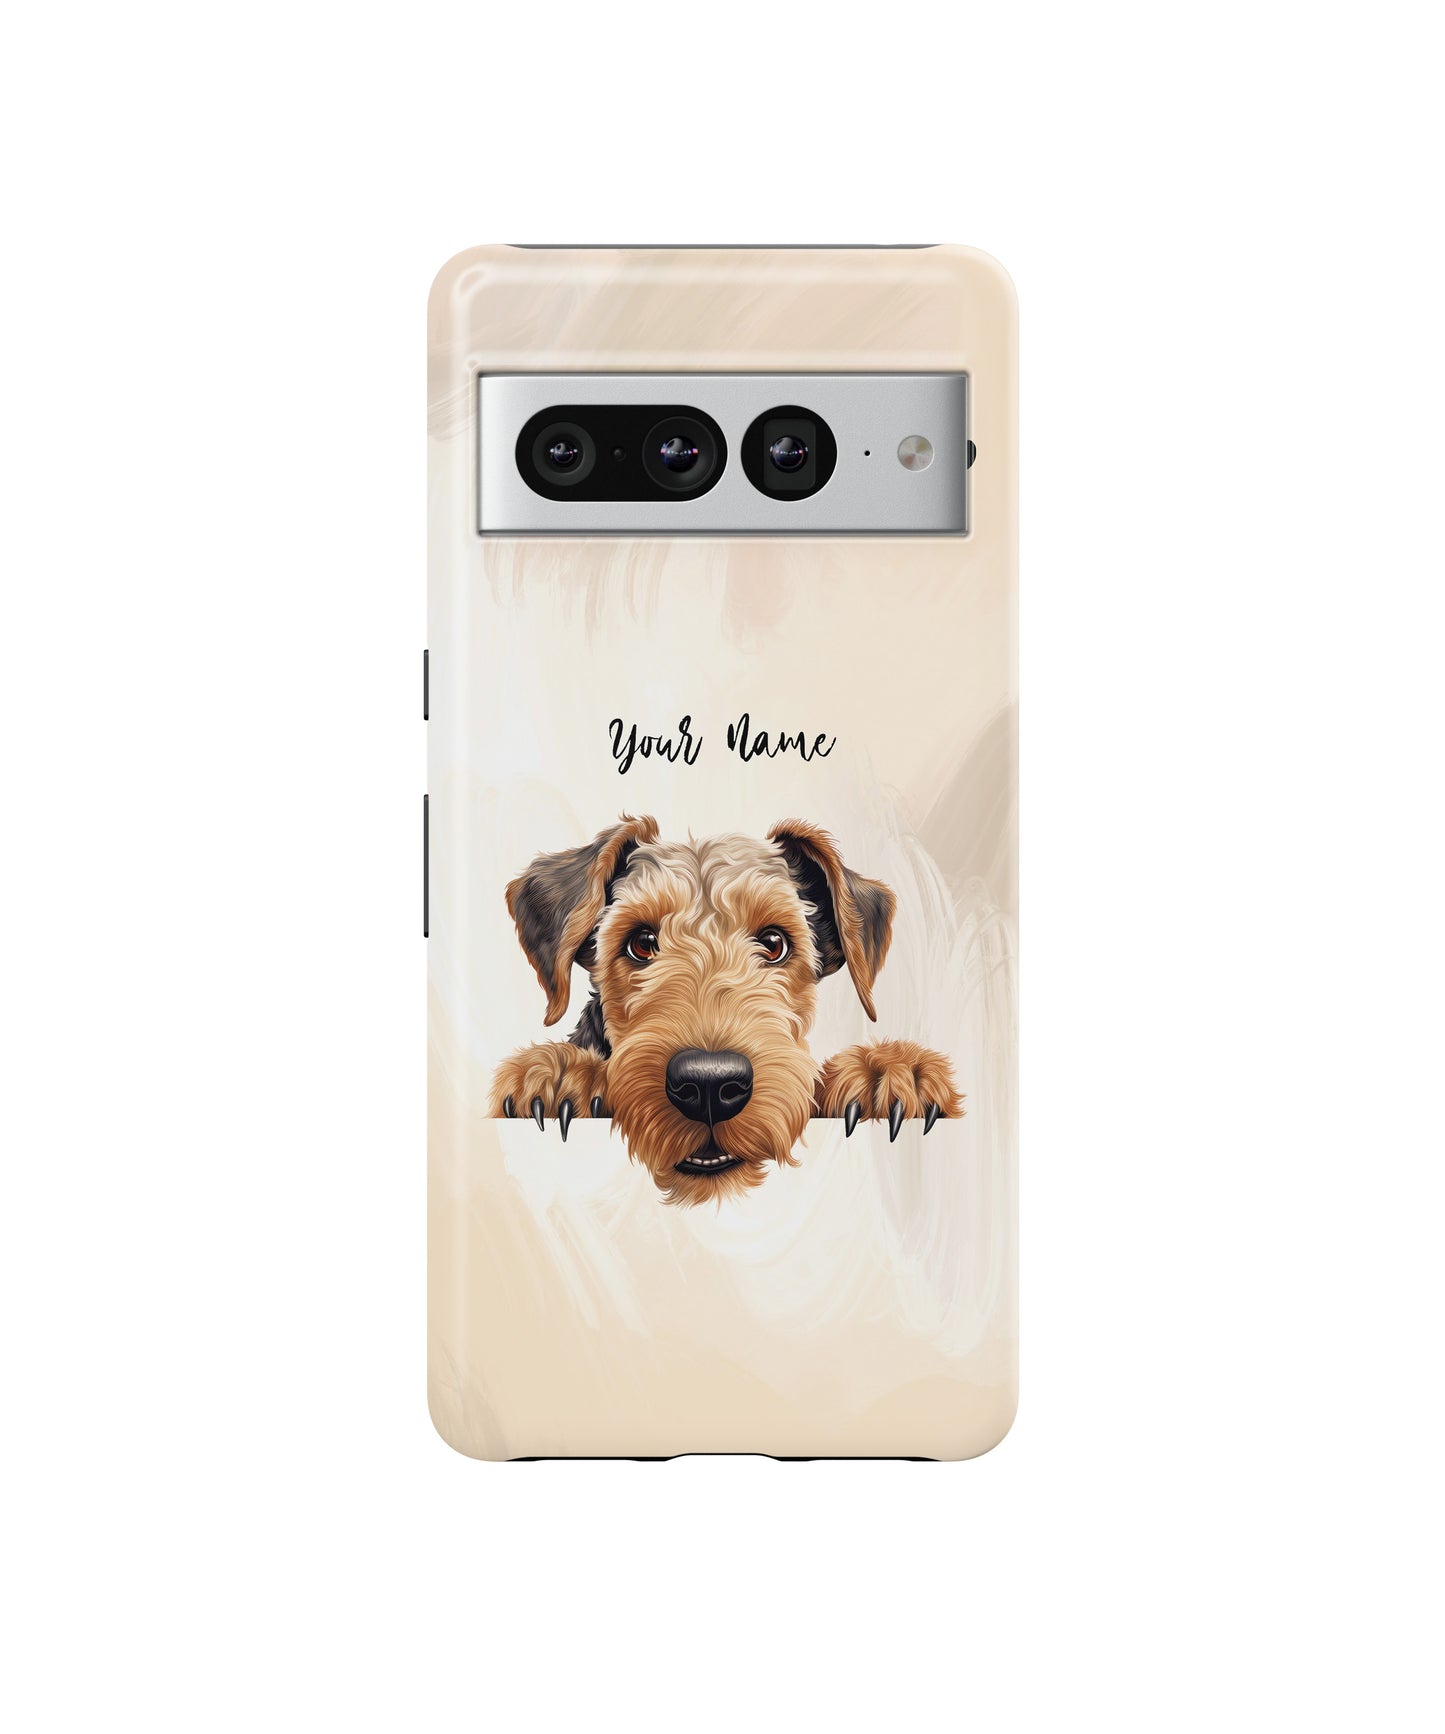 Airedale Terrier Dog Phone - Google Pixel